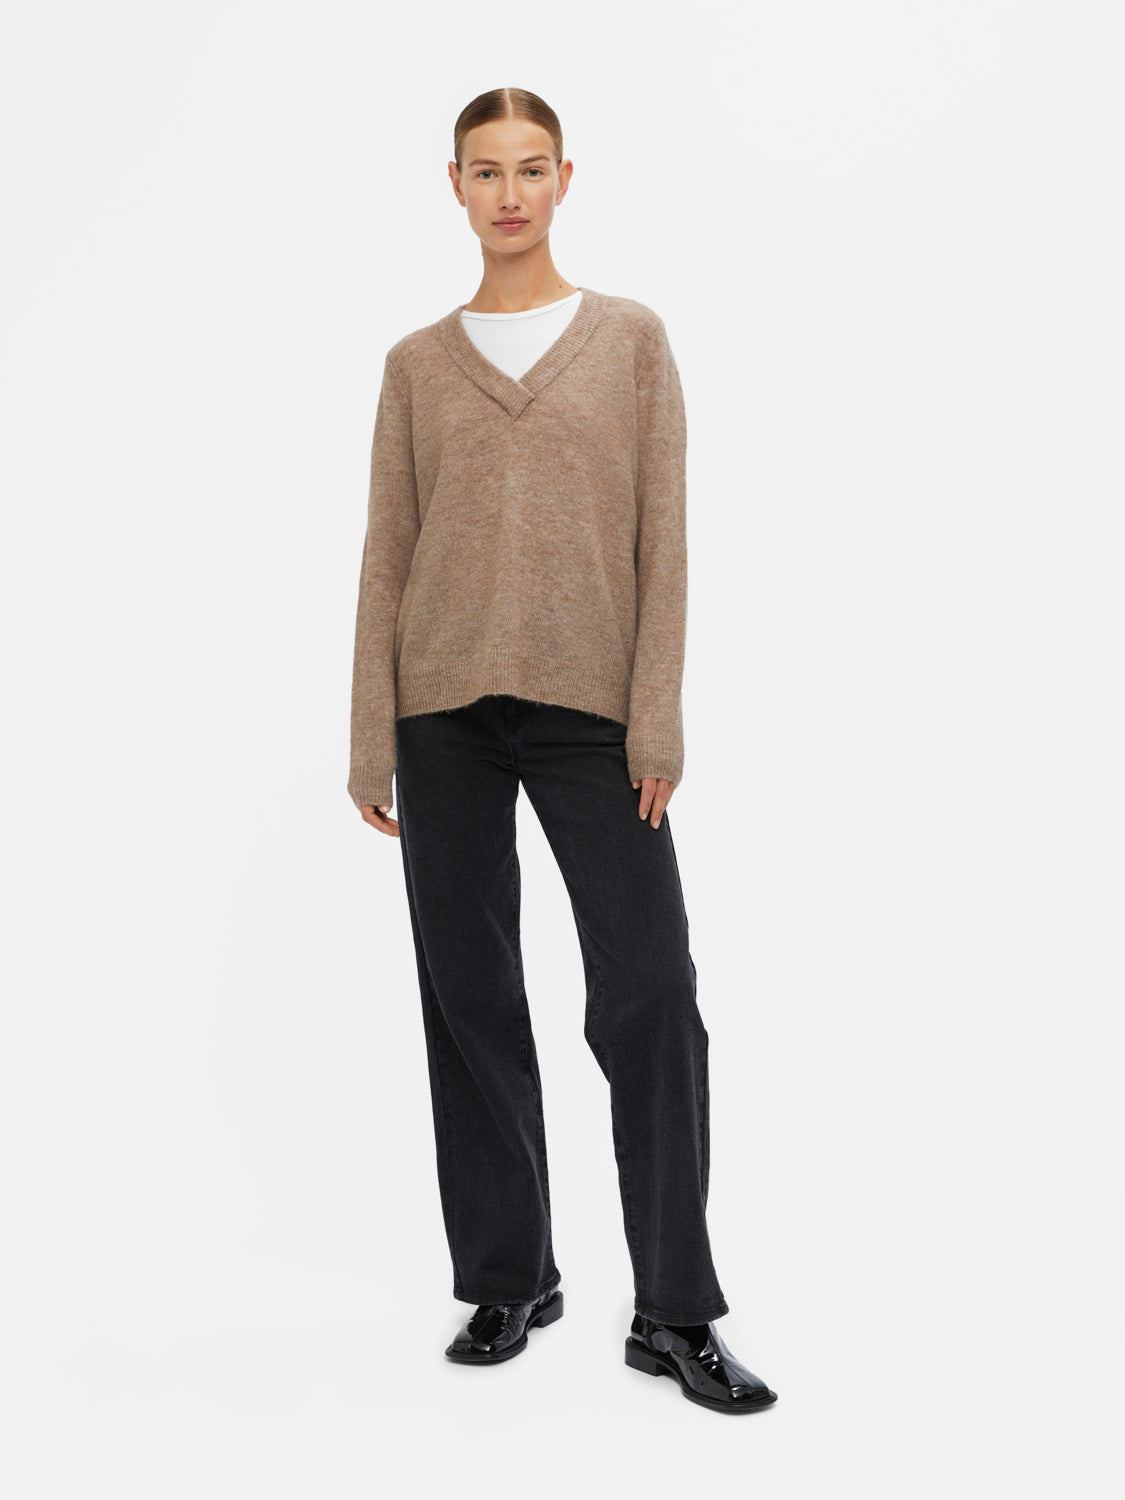 OBJELLIE Pullover - Fossil